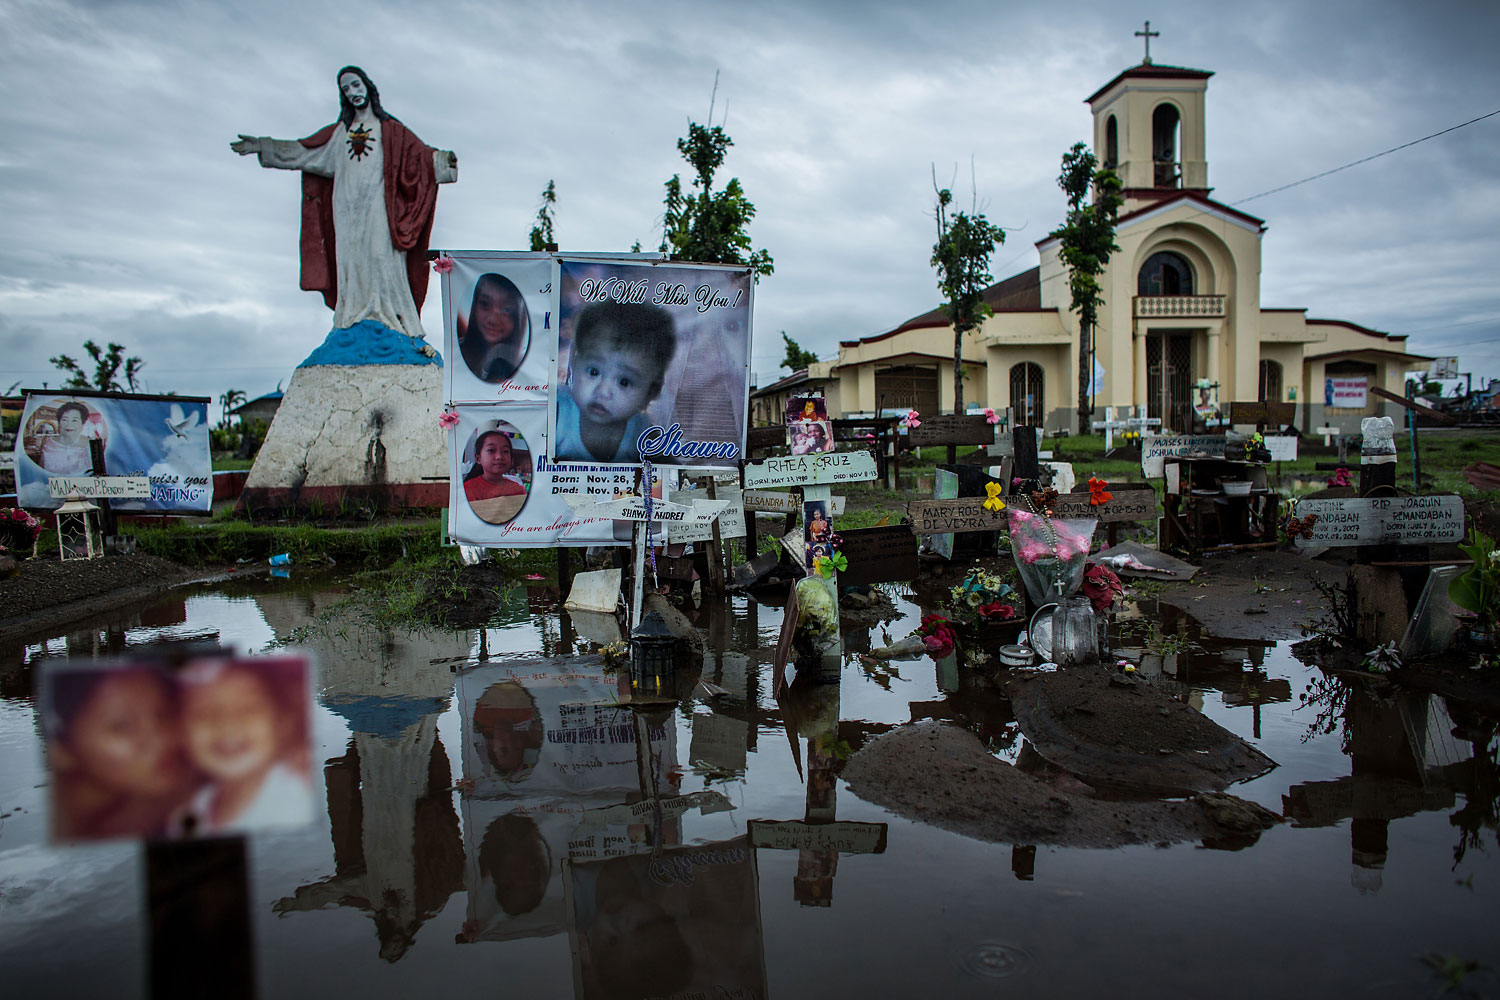 Crosses and personal items are seen at the makeshift mass grave site at San Joaquin Parish on April 16, 2014 in Tacloban.